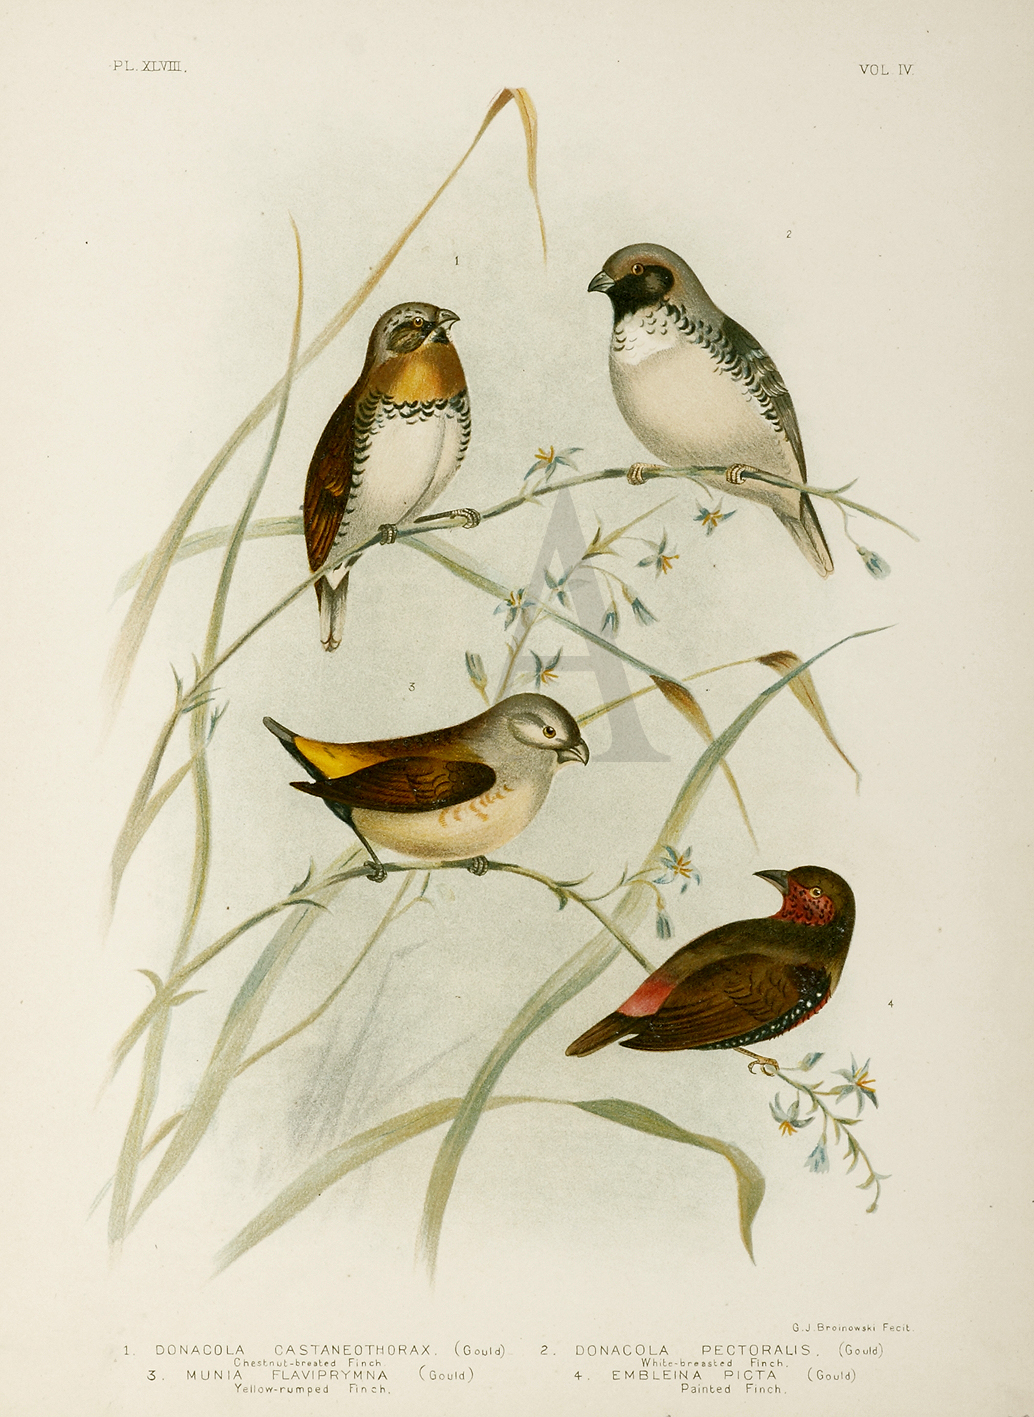 Donacola Castaneothorax, Chestnut-breasted Finch. 2.Donacola Pectoralis,White-breasted Finch.3.Munia Flaviprymna,Yellow-rumped Finch. 4.Embleina Picta,Painted Finch. - Antique Print from 1889